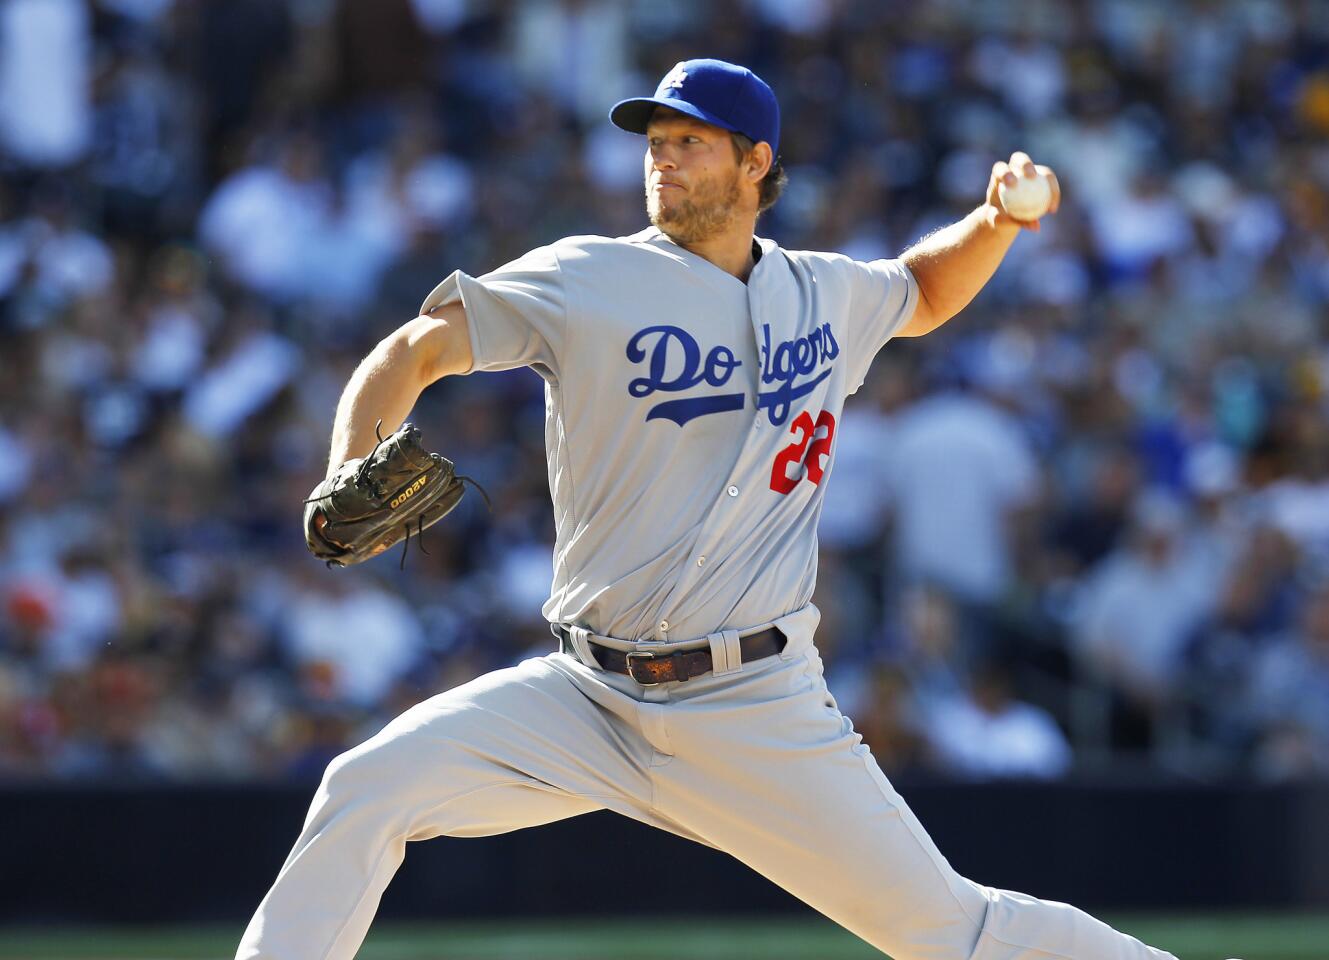 Dodgers dominant in 15-0 opening day win at San Diego